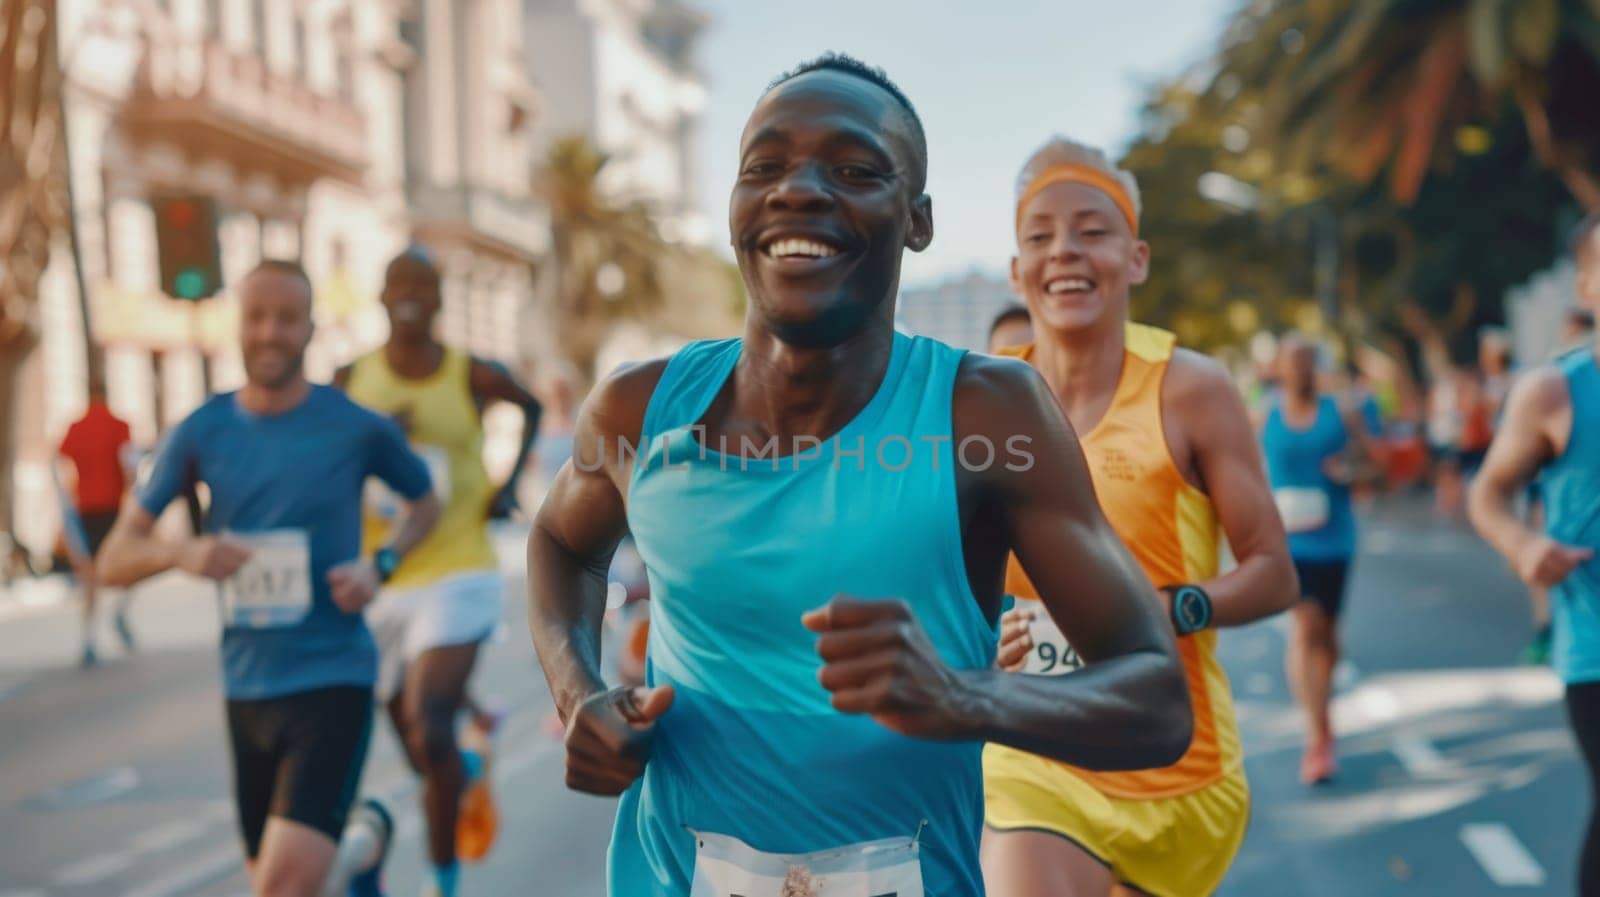 group of marathon runners, sport and activity background or banner poster.